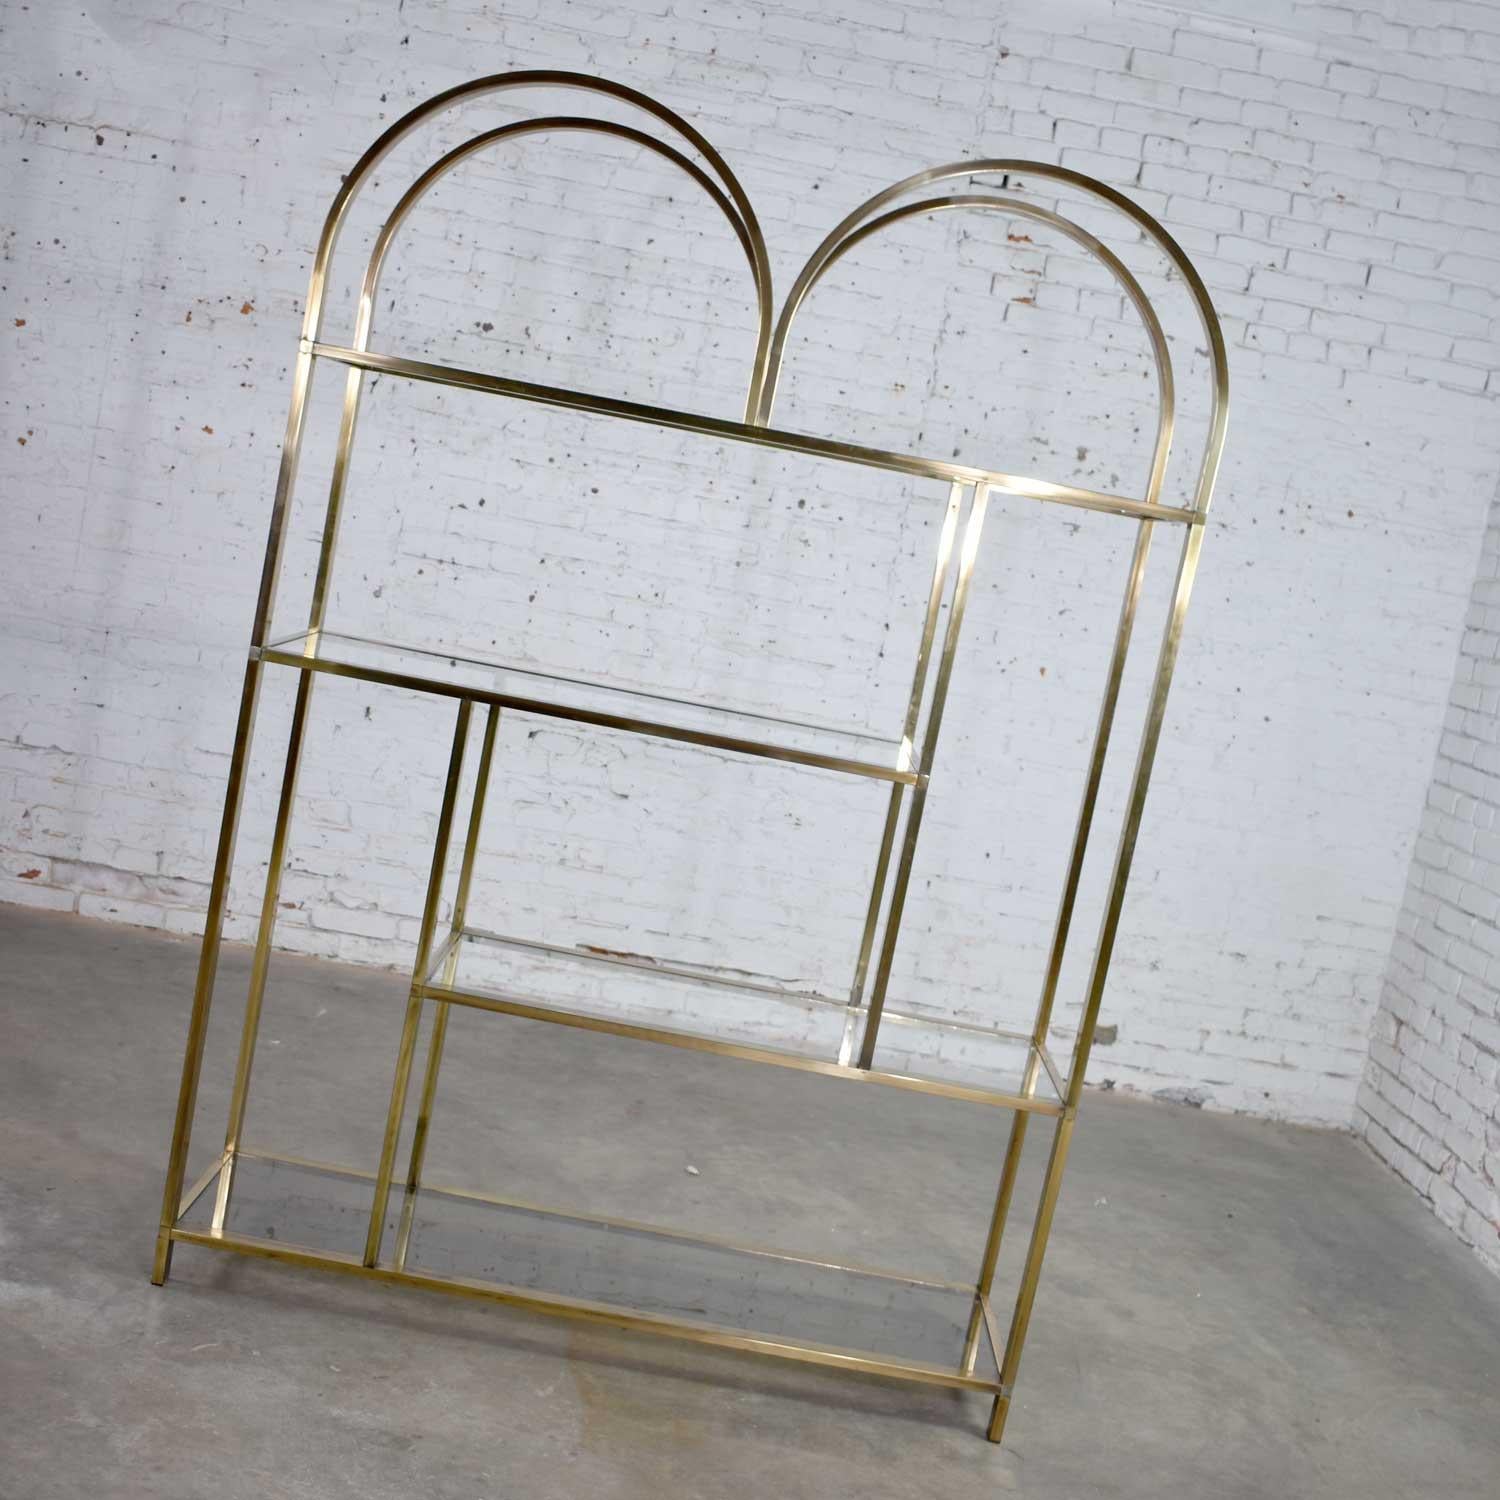 Vintage Modern Double Arched Étagère Display Shelves Brass Plated and Glass 4